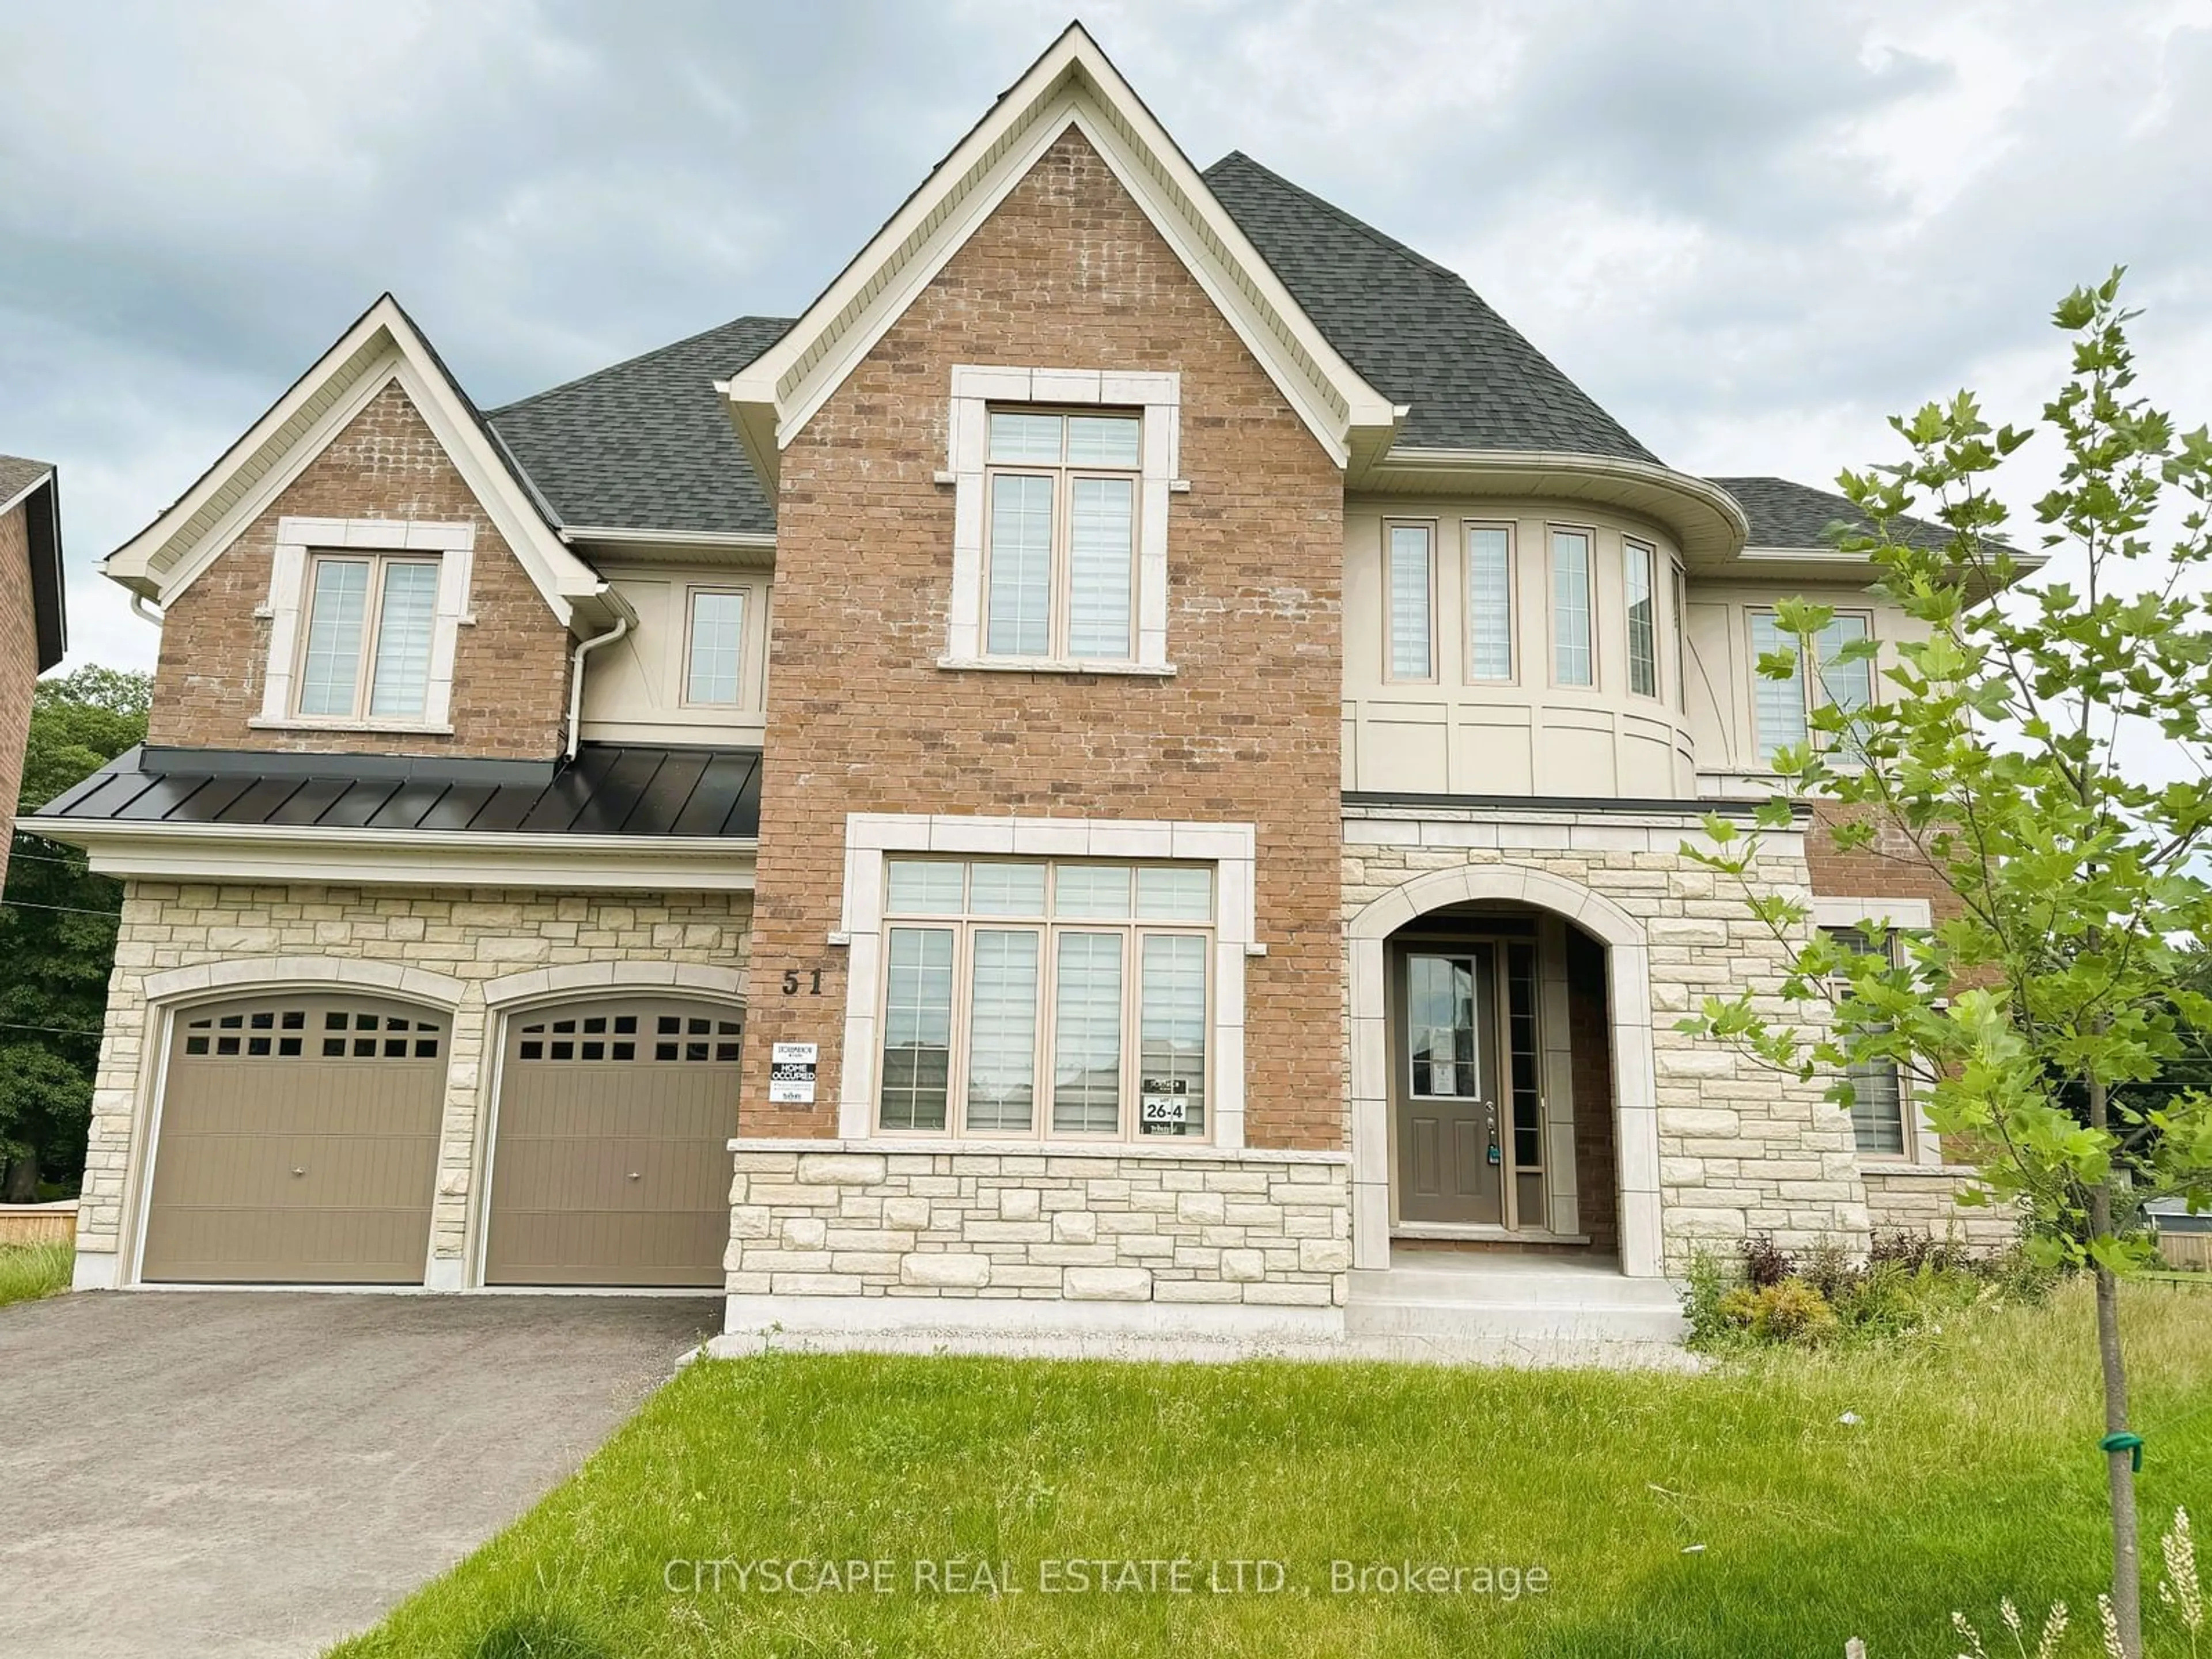 Home with brick exterior material for 51 Sanford Circ, Springwater Ontario L9X 2A9